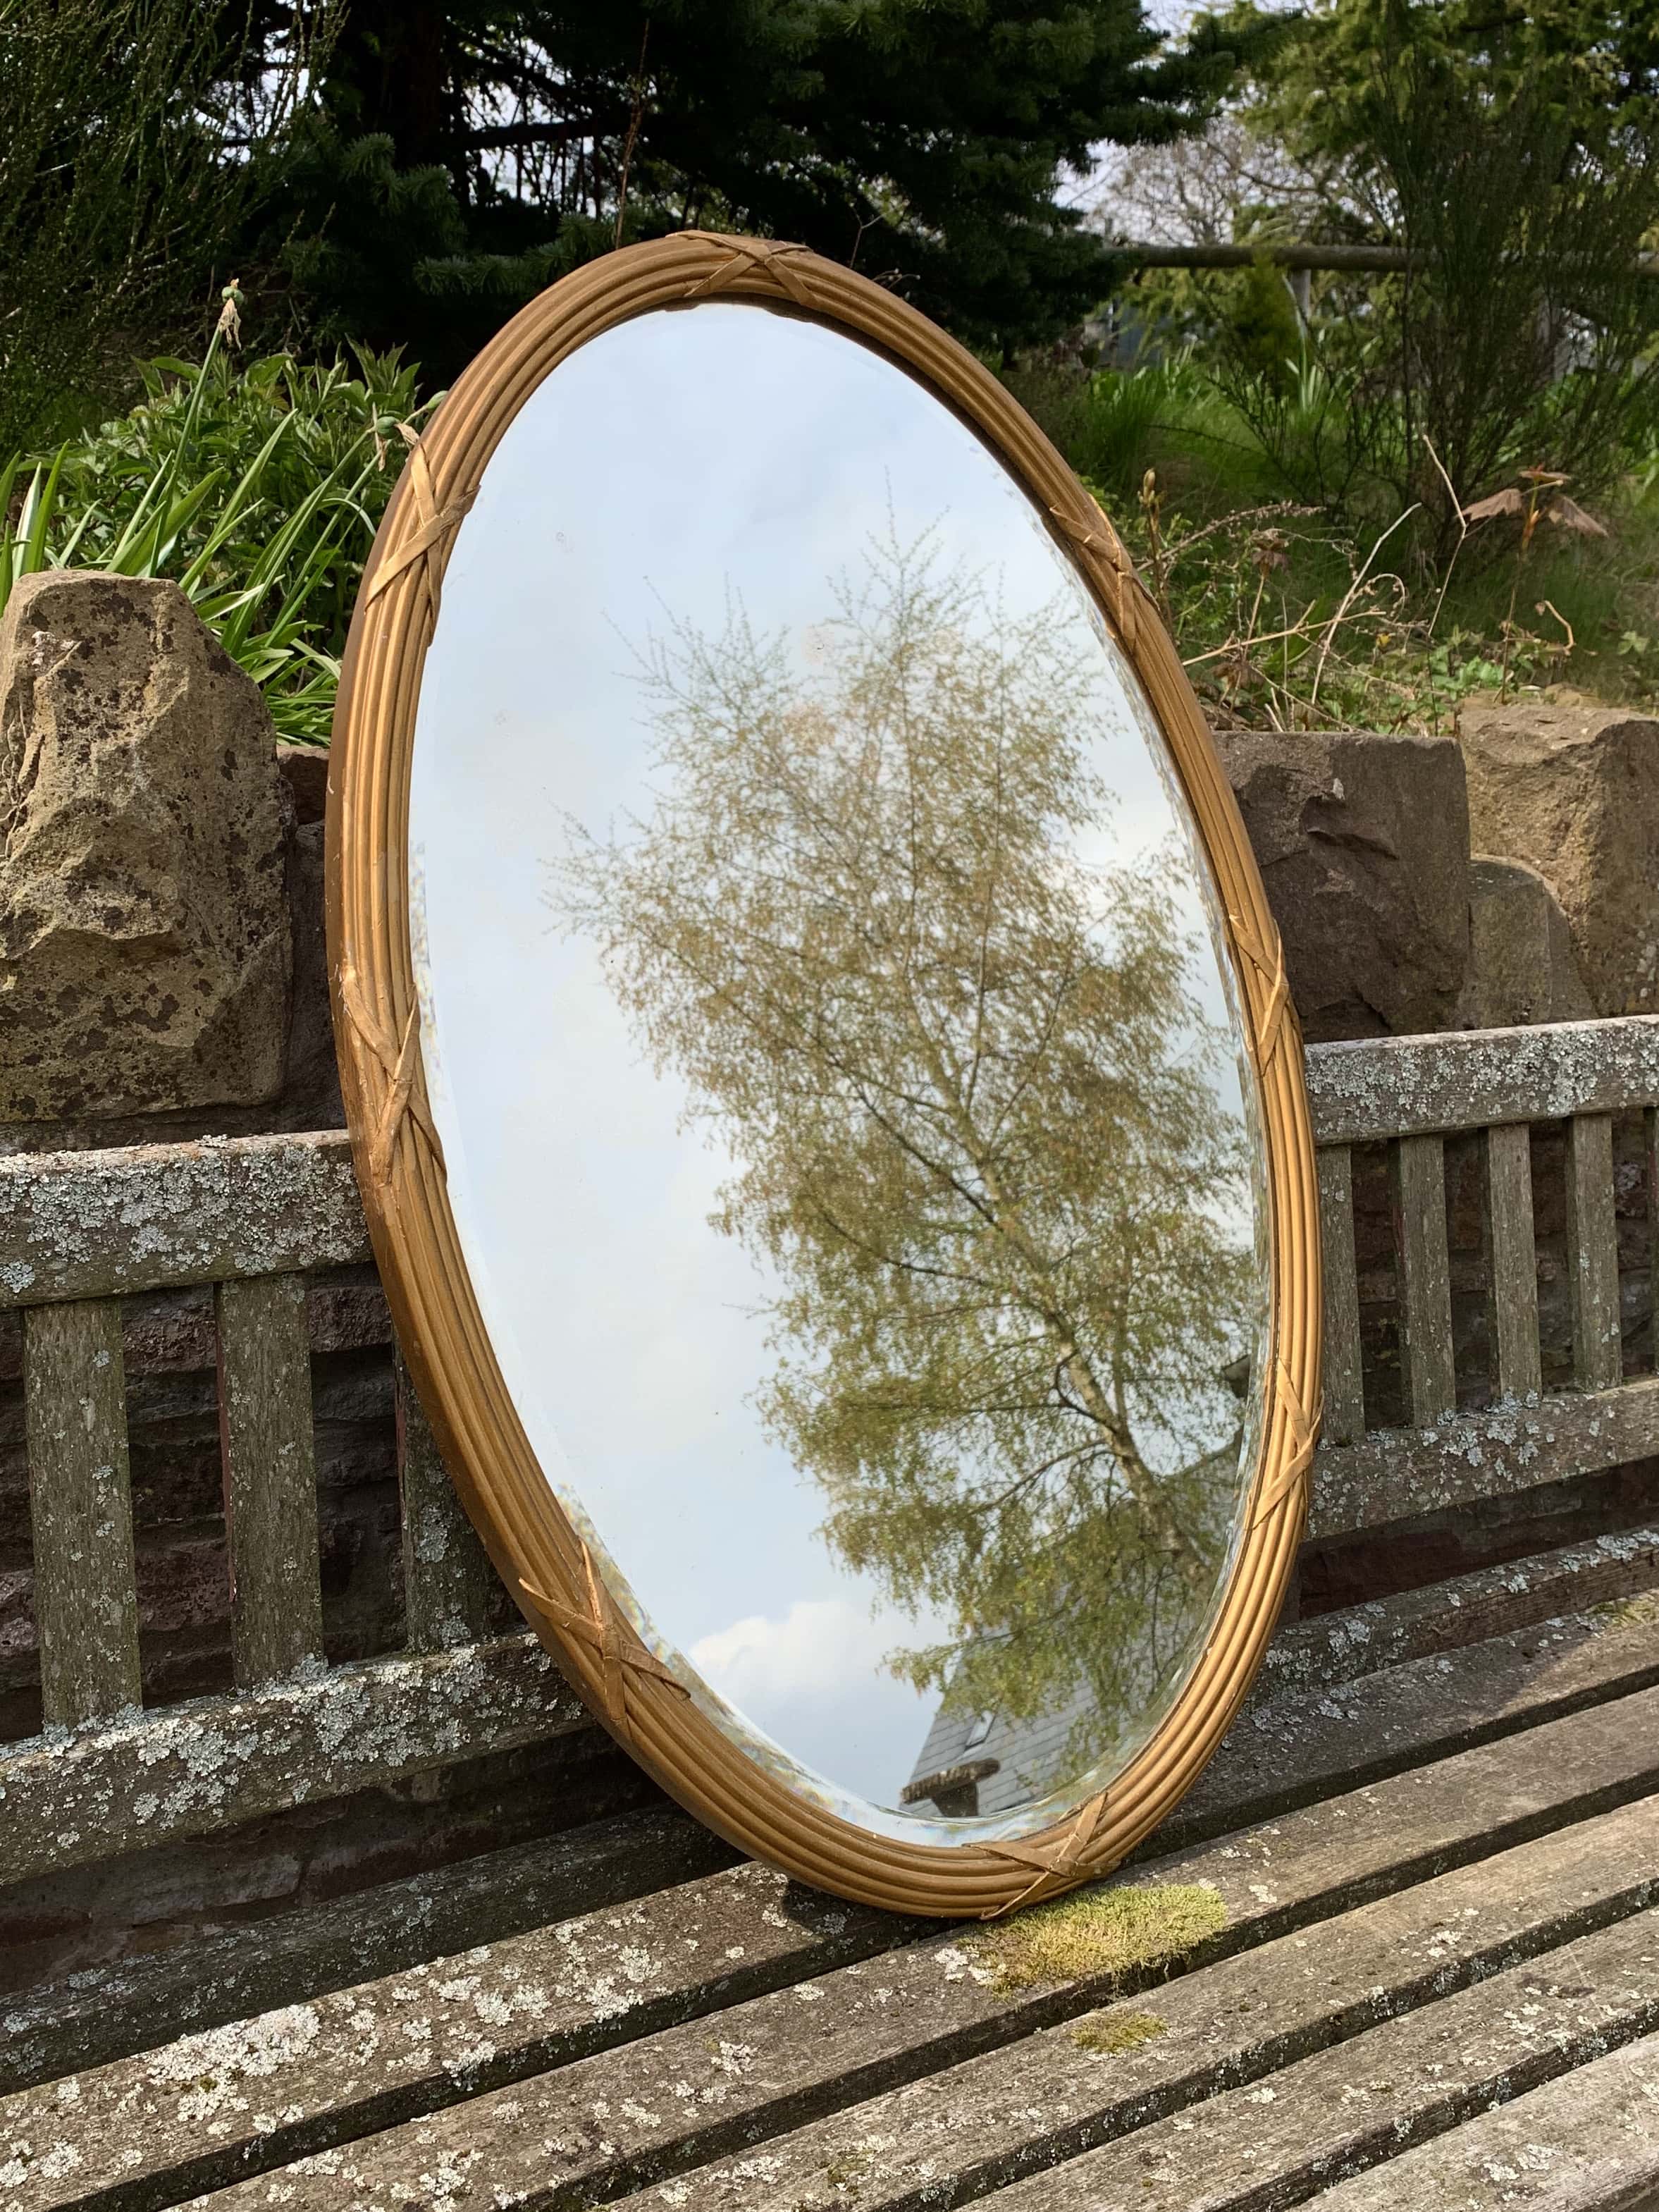 Oval mirror